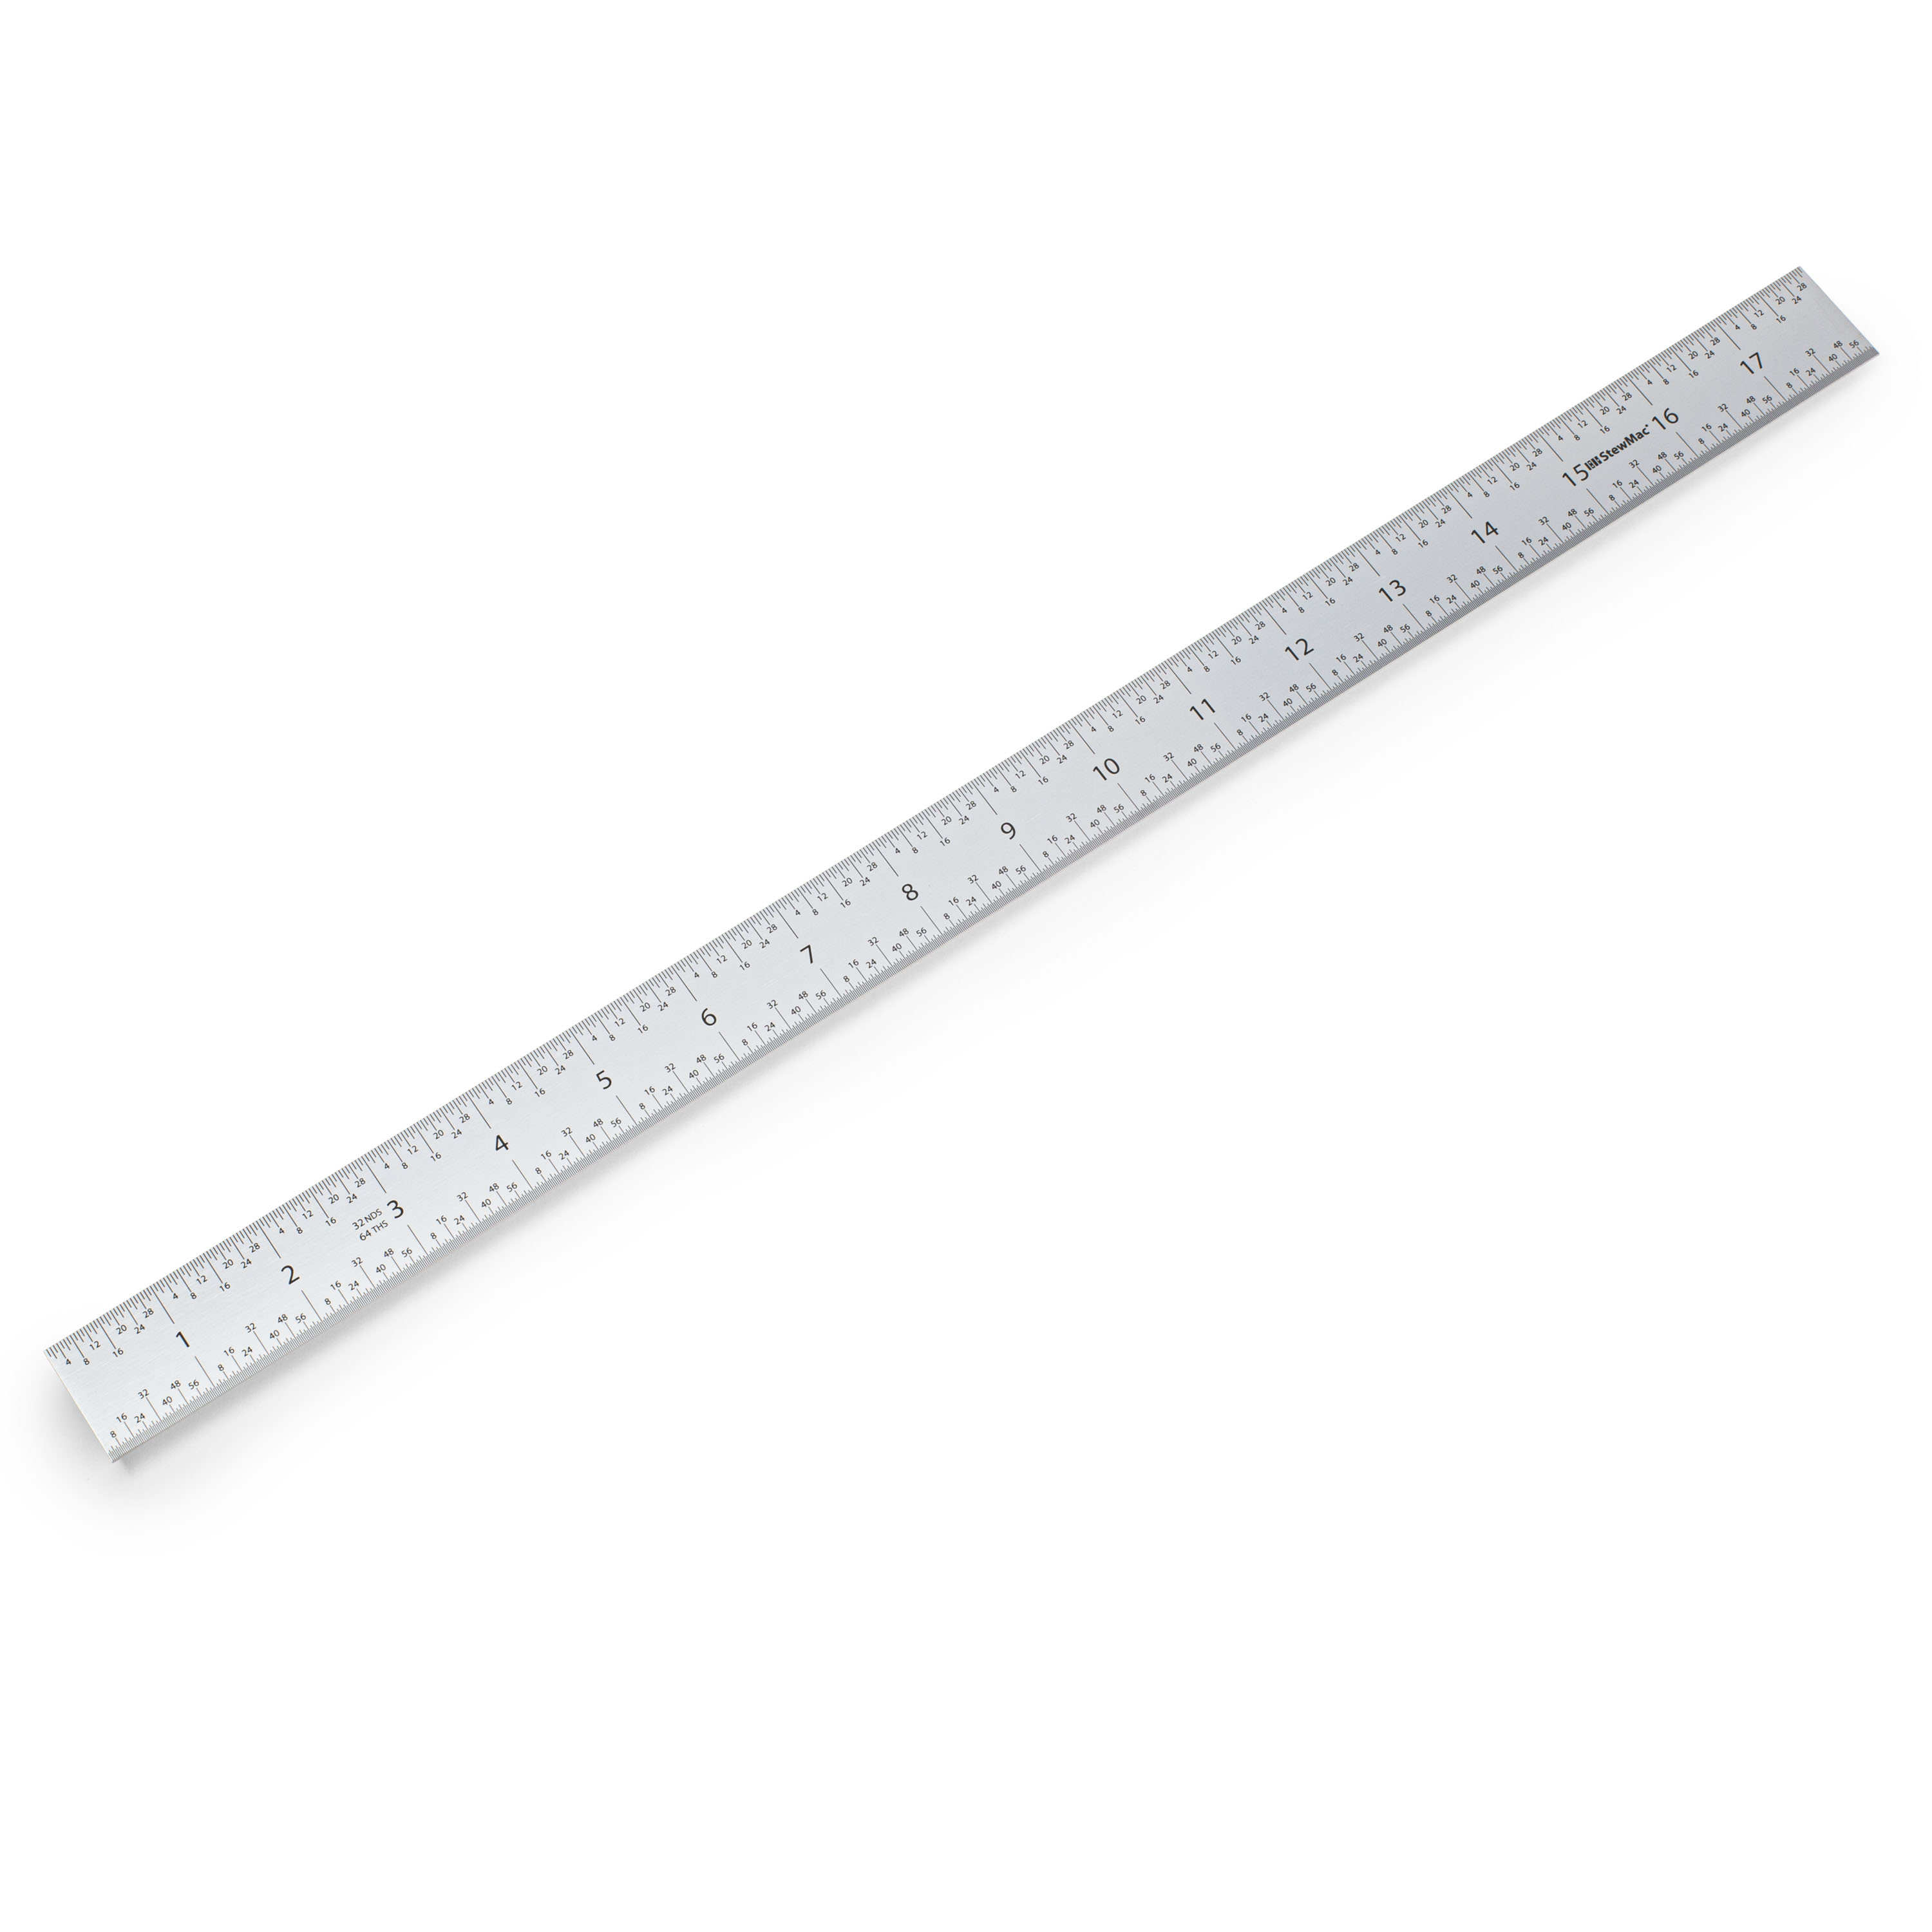 Plain Wooden Rulers Available in 30cm/12 Inch or 15cm/6 Inch 